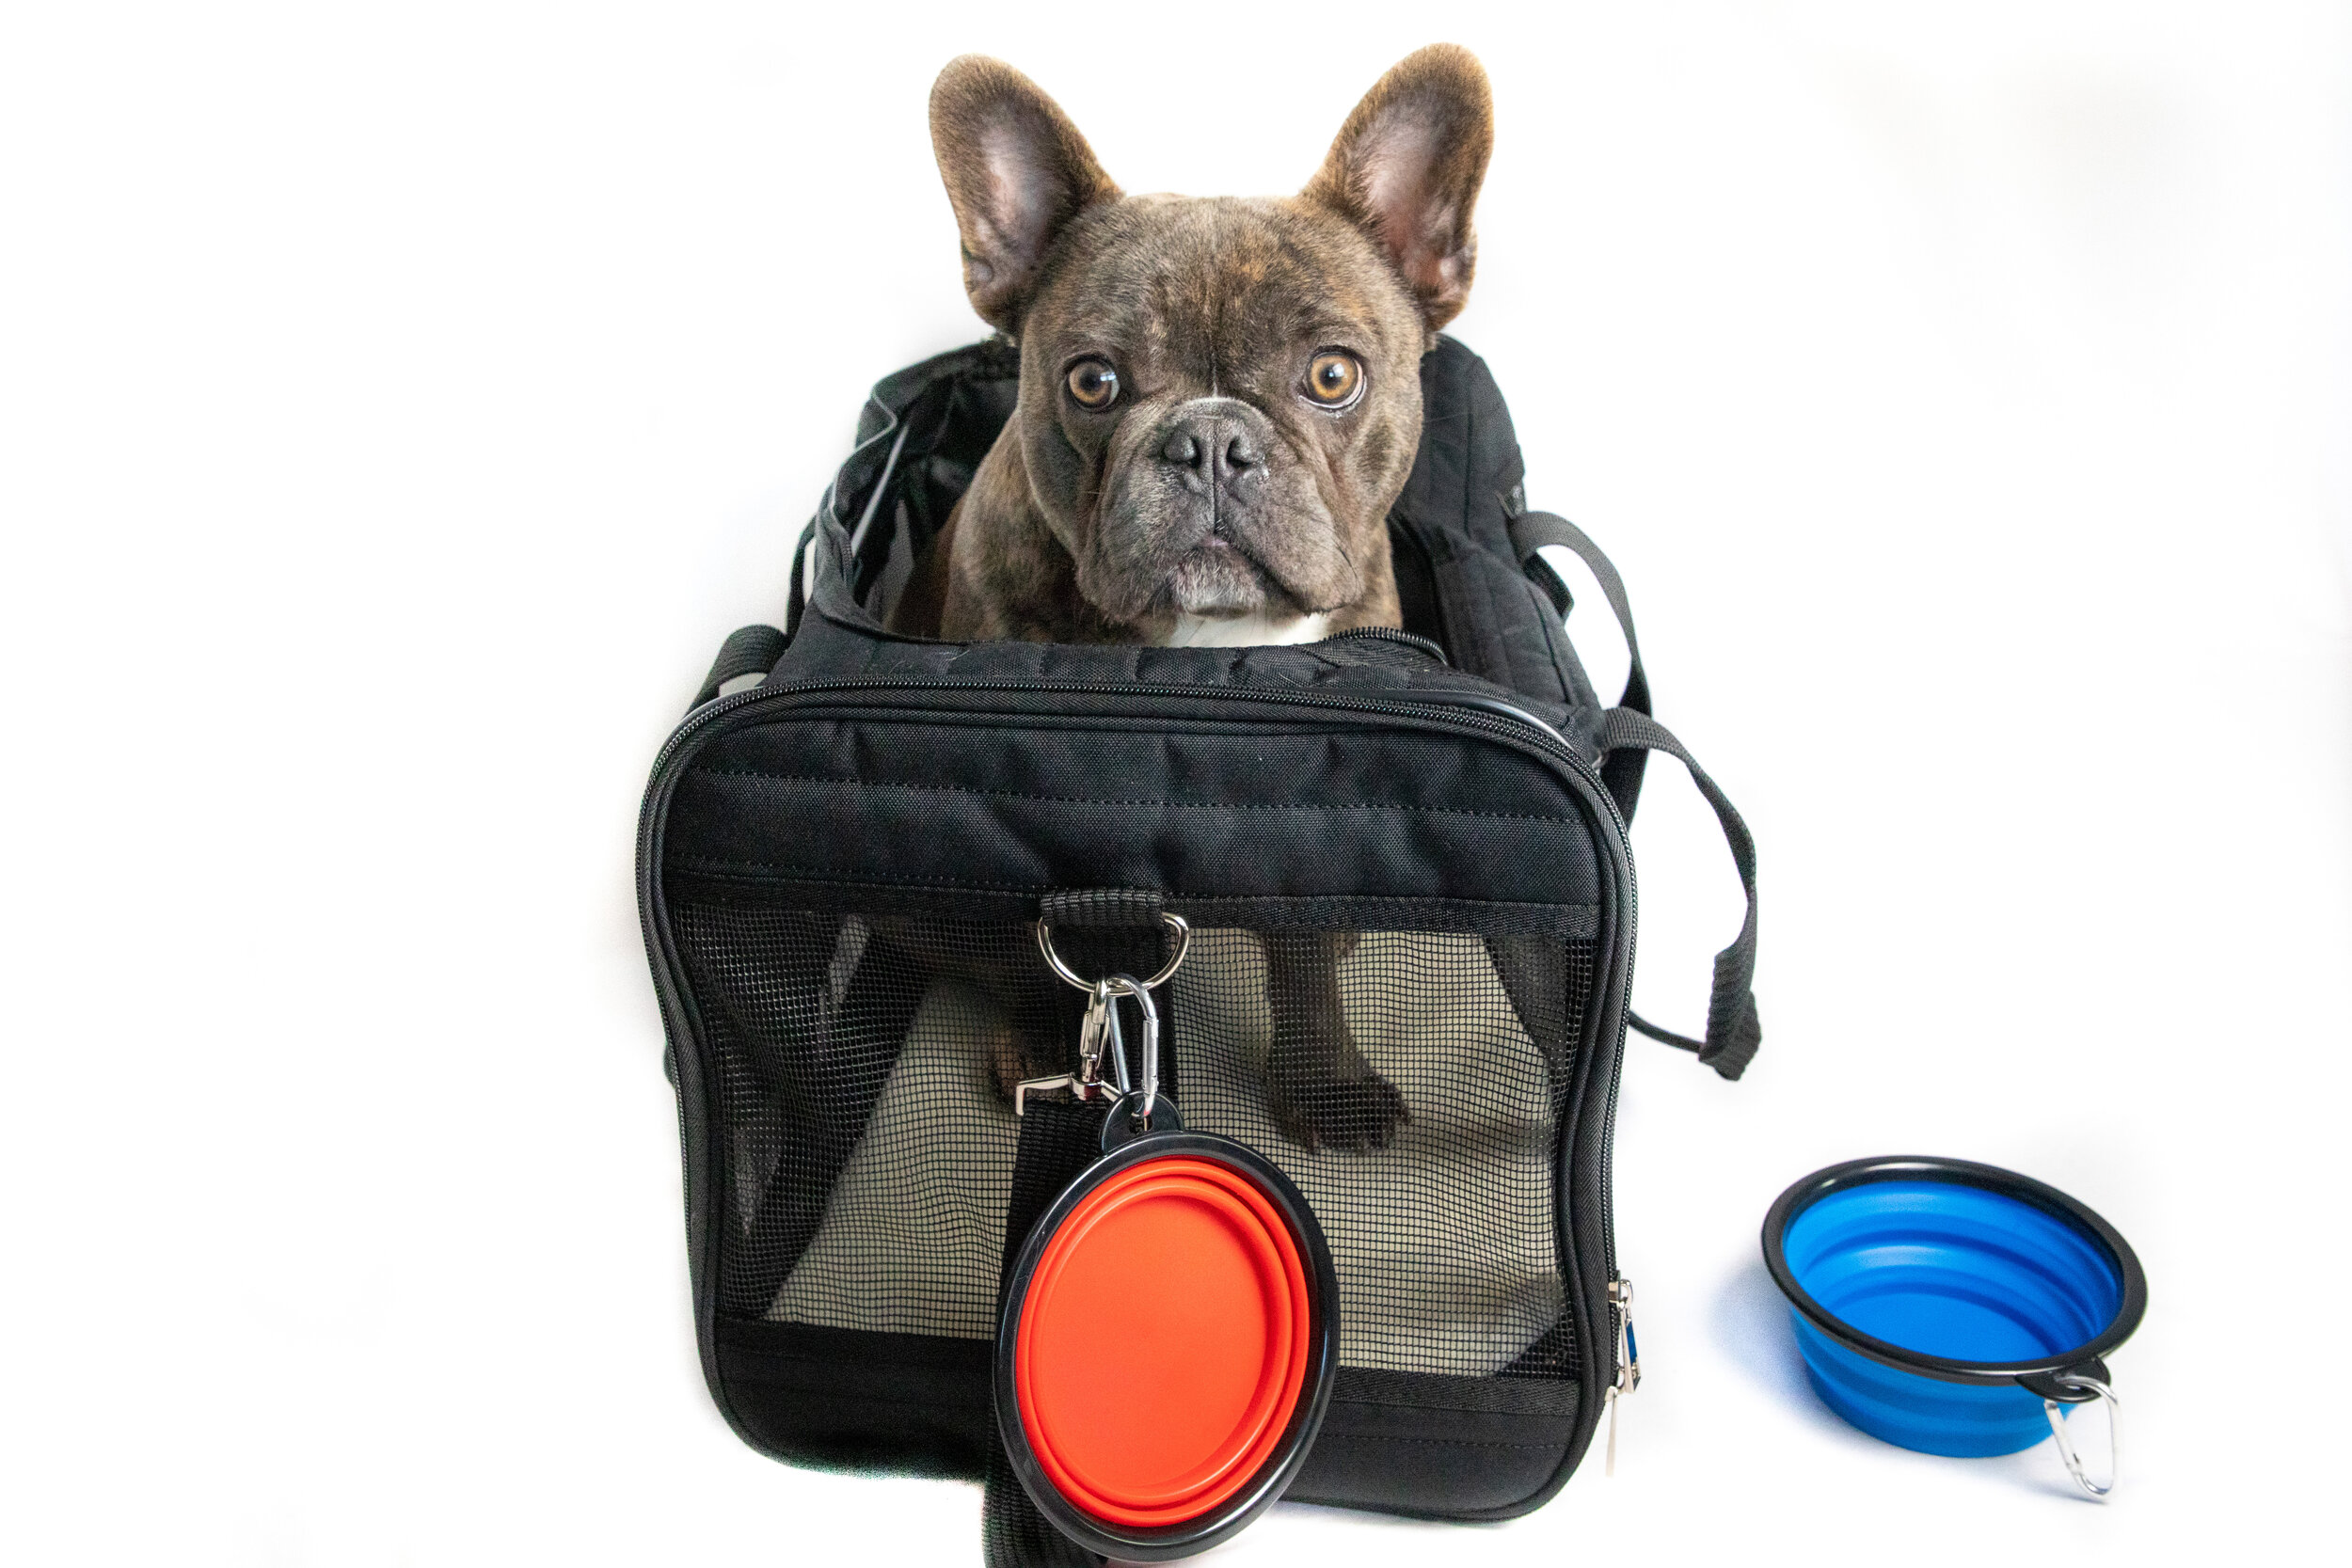 Dog_Carrier_Product_Shots (15 of 21).jpg